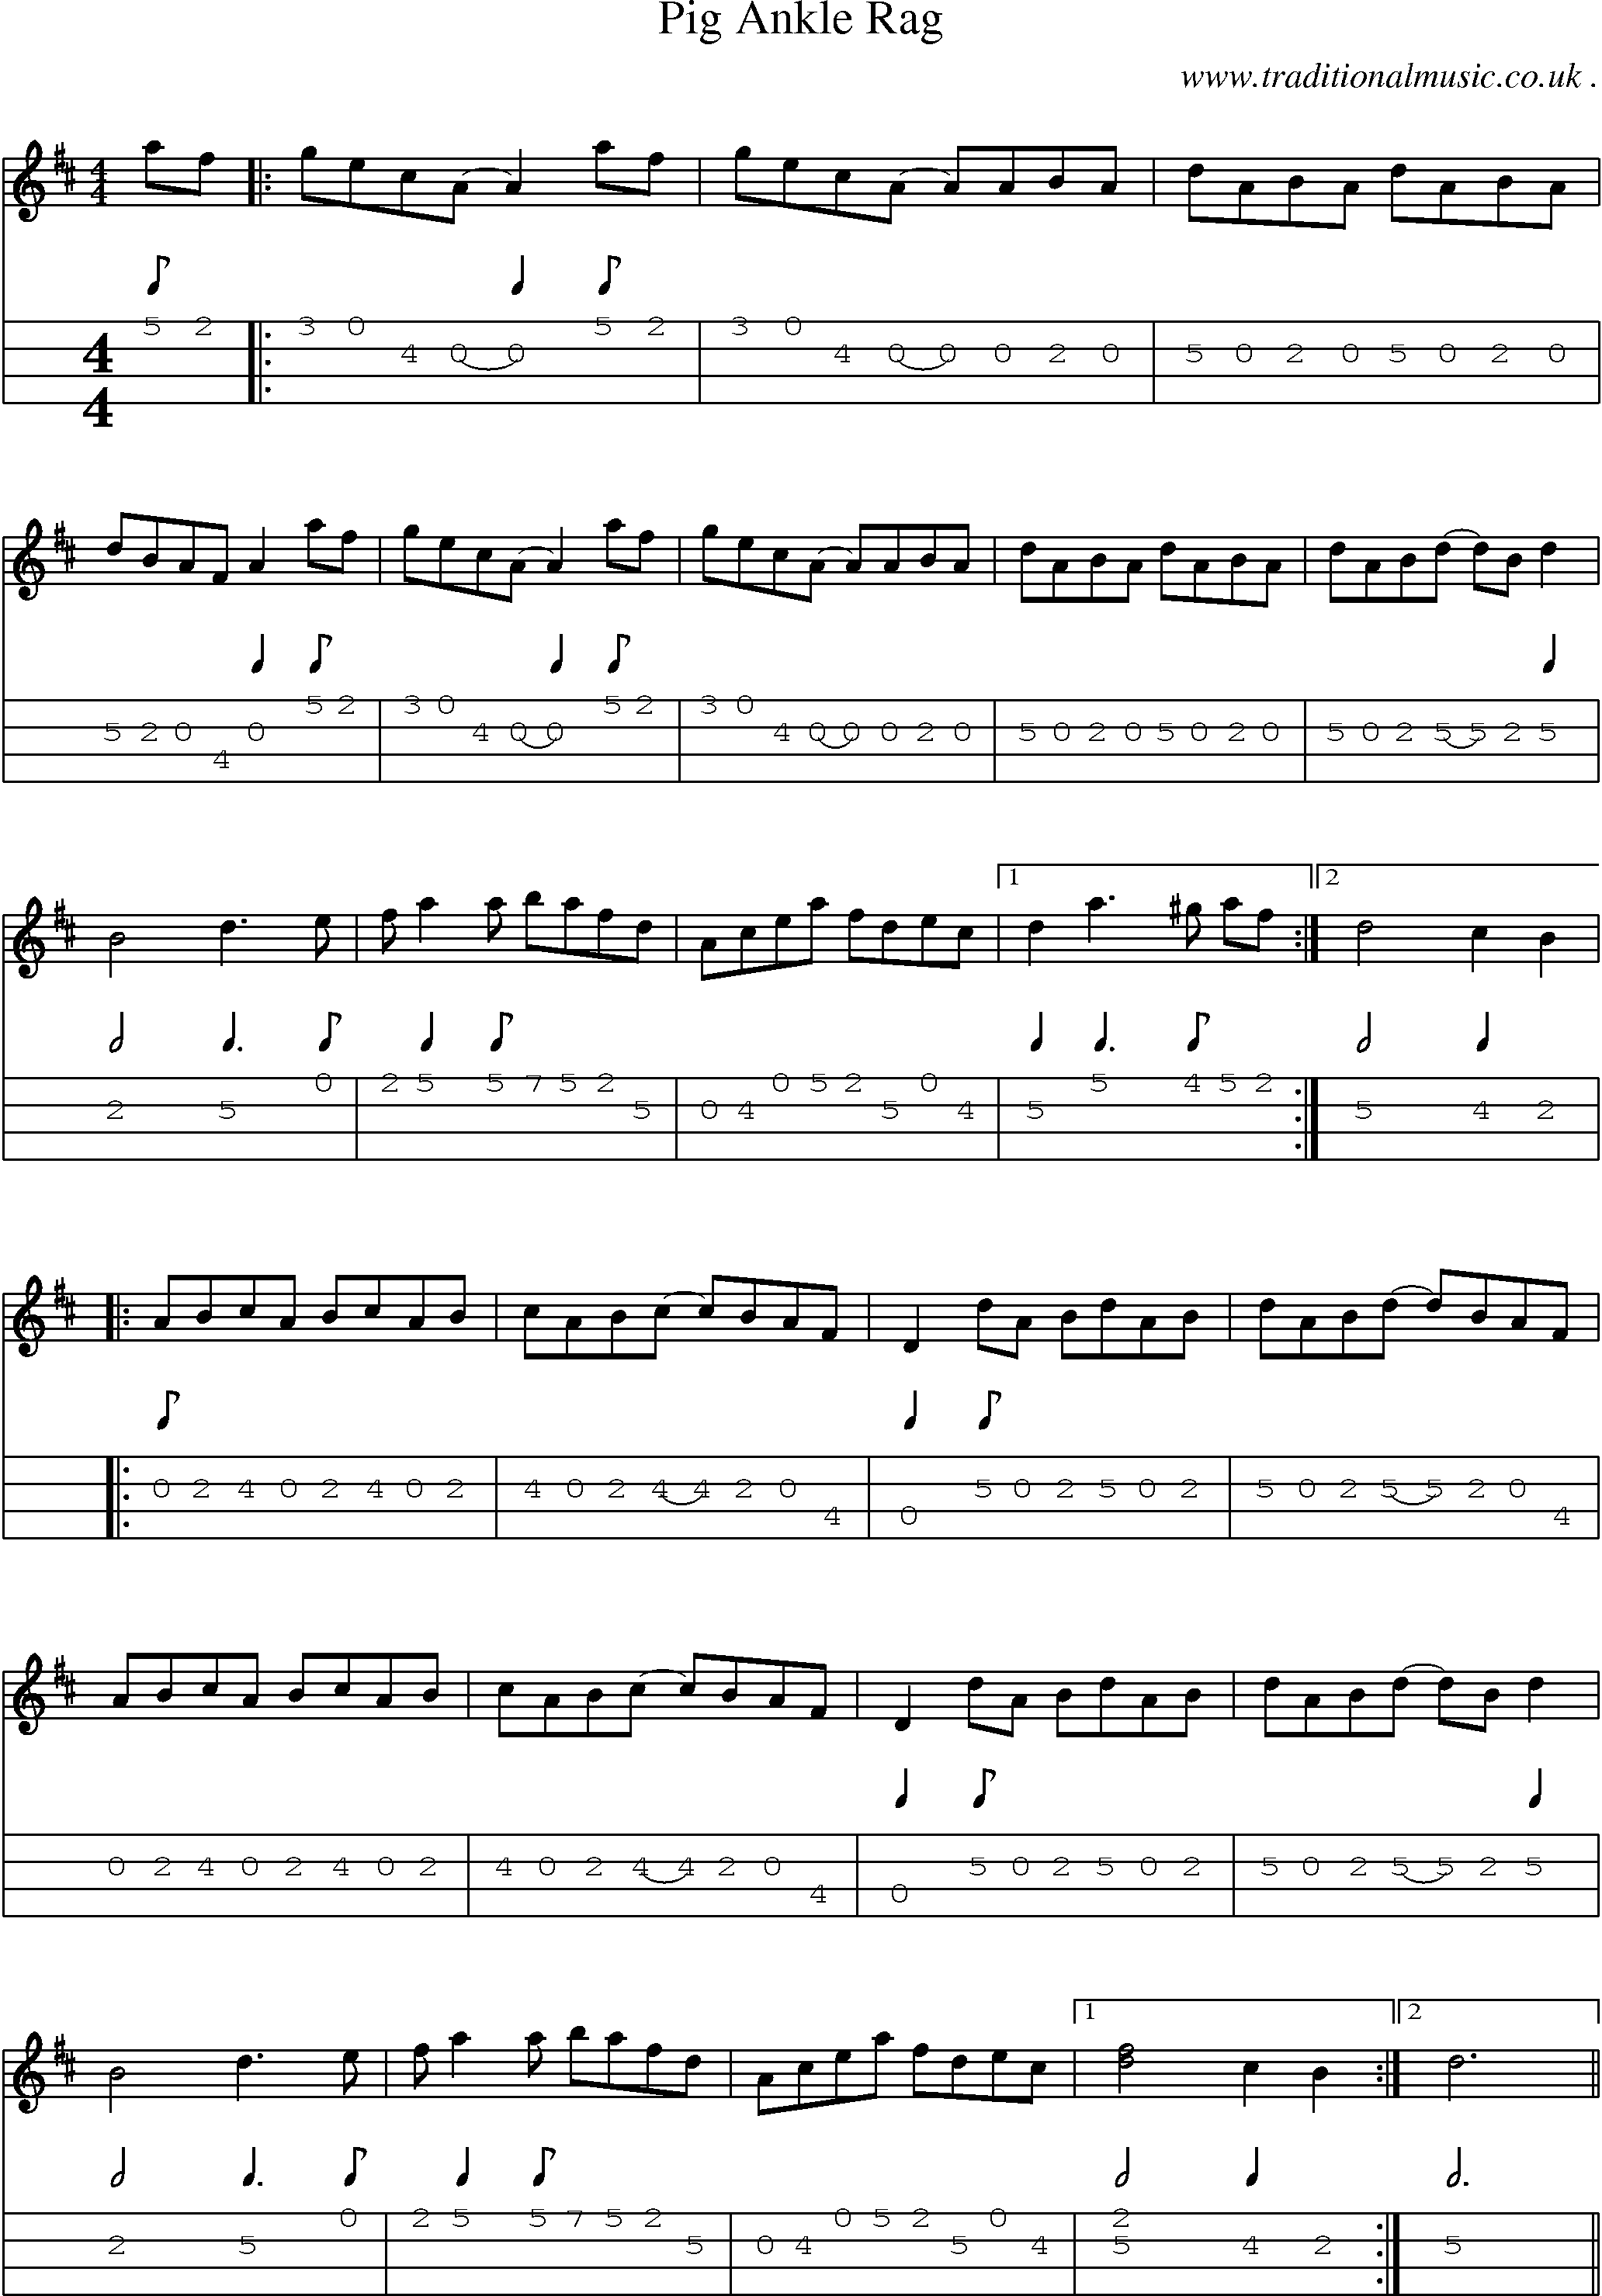 Music Score and Mandolin Tabs for Pig Ankle Rag